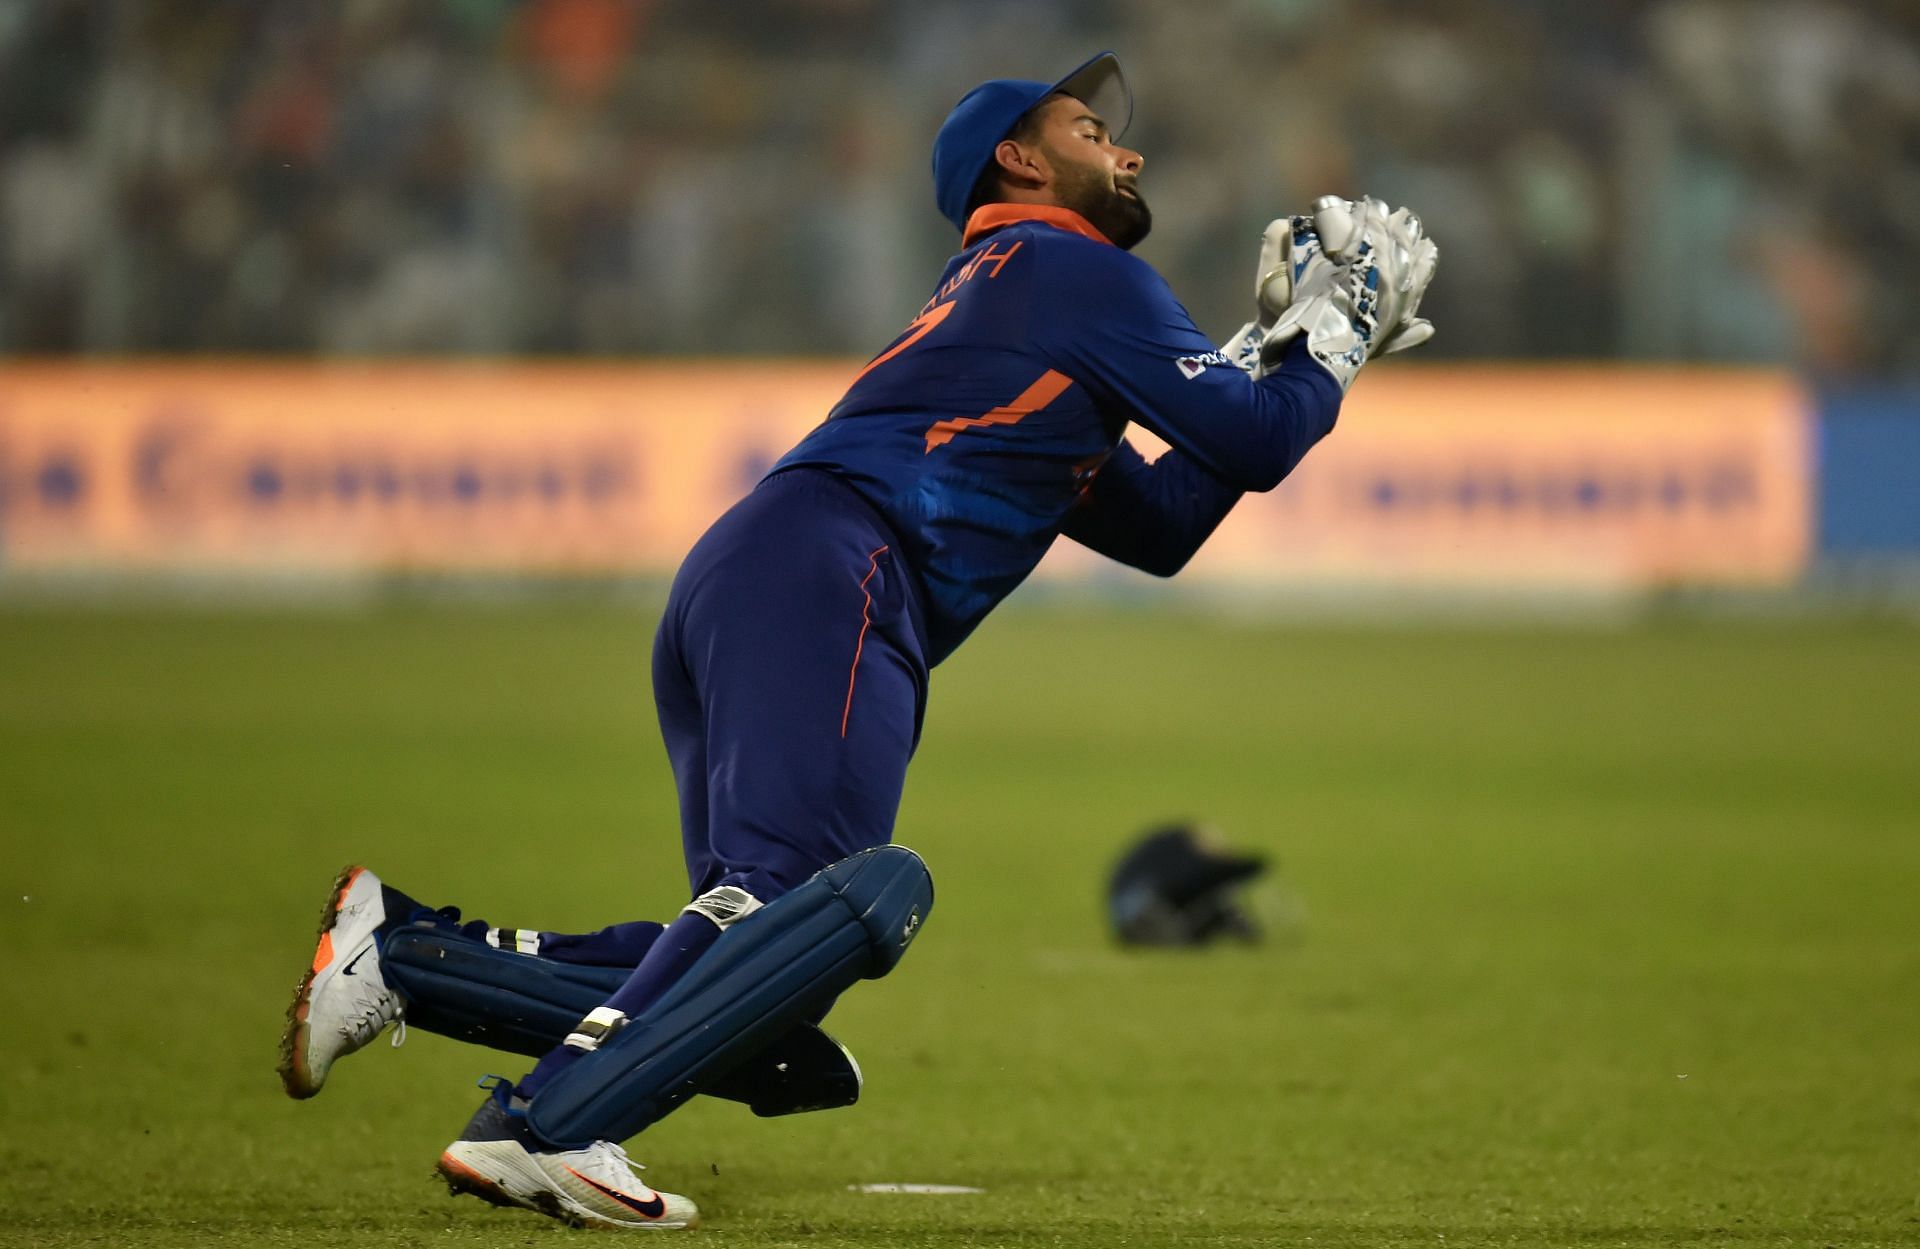 Rishabh Pant in action. (Pic: Getty)